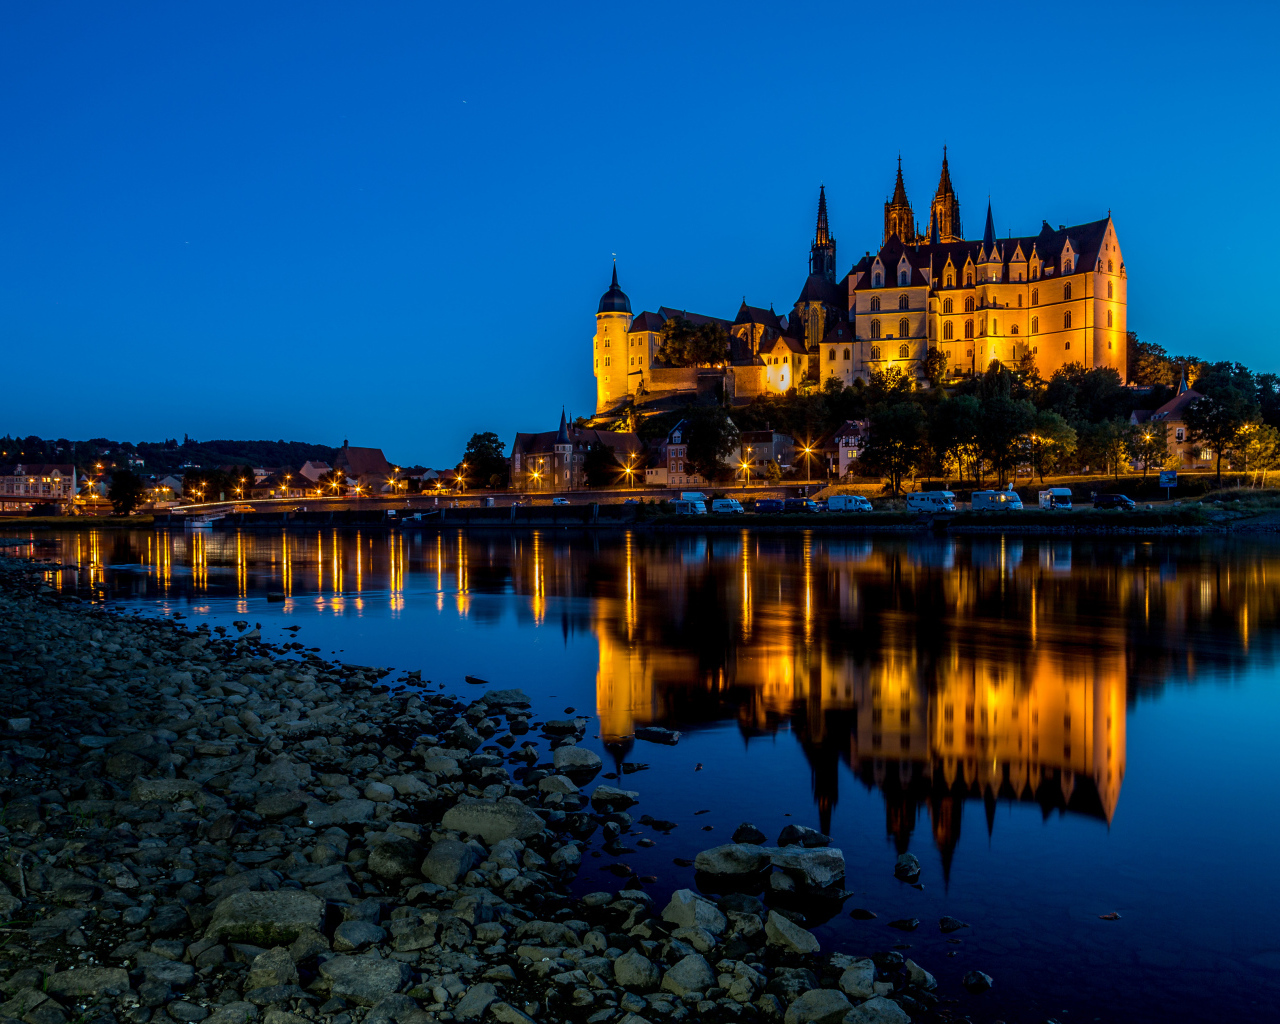 Evening lights of the castle of Albrechtsburg are reflected in the water, the city of Meissen, Germany